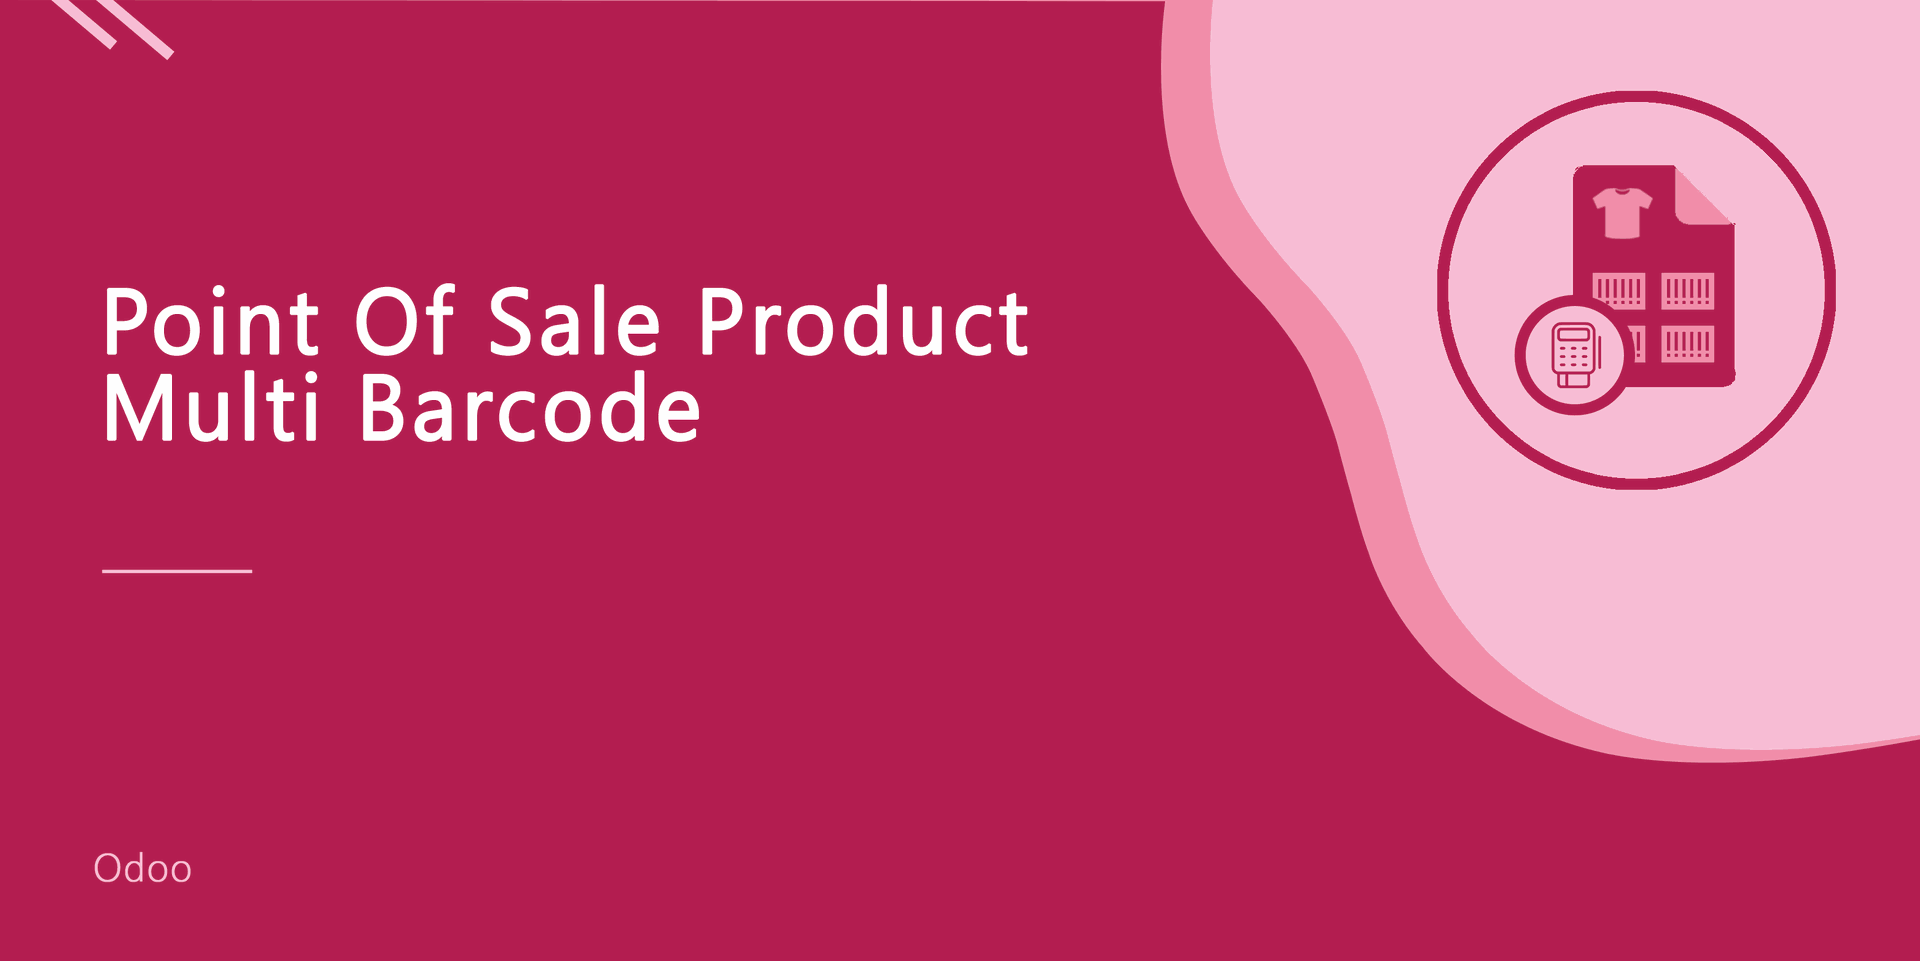 Point Of Sale Product Multi Barcode